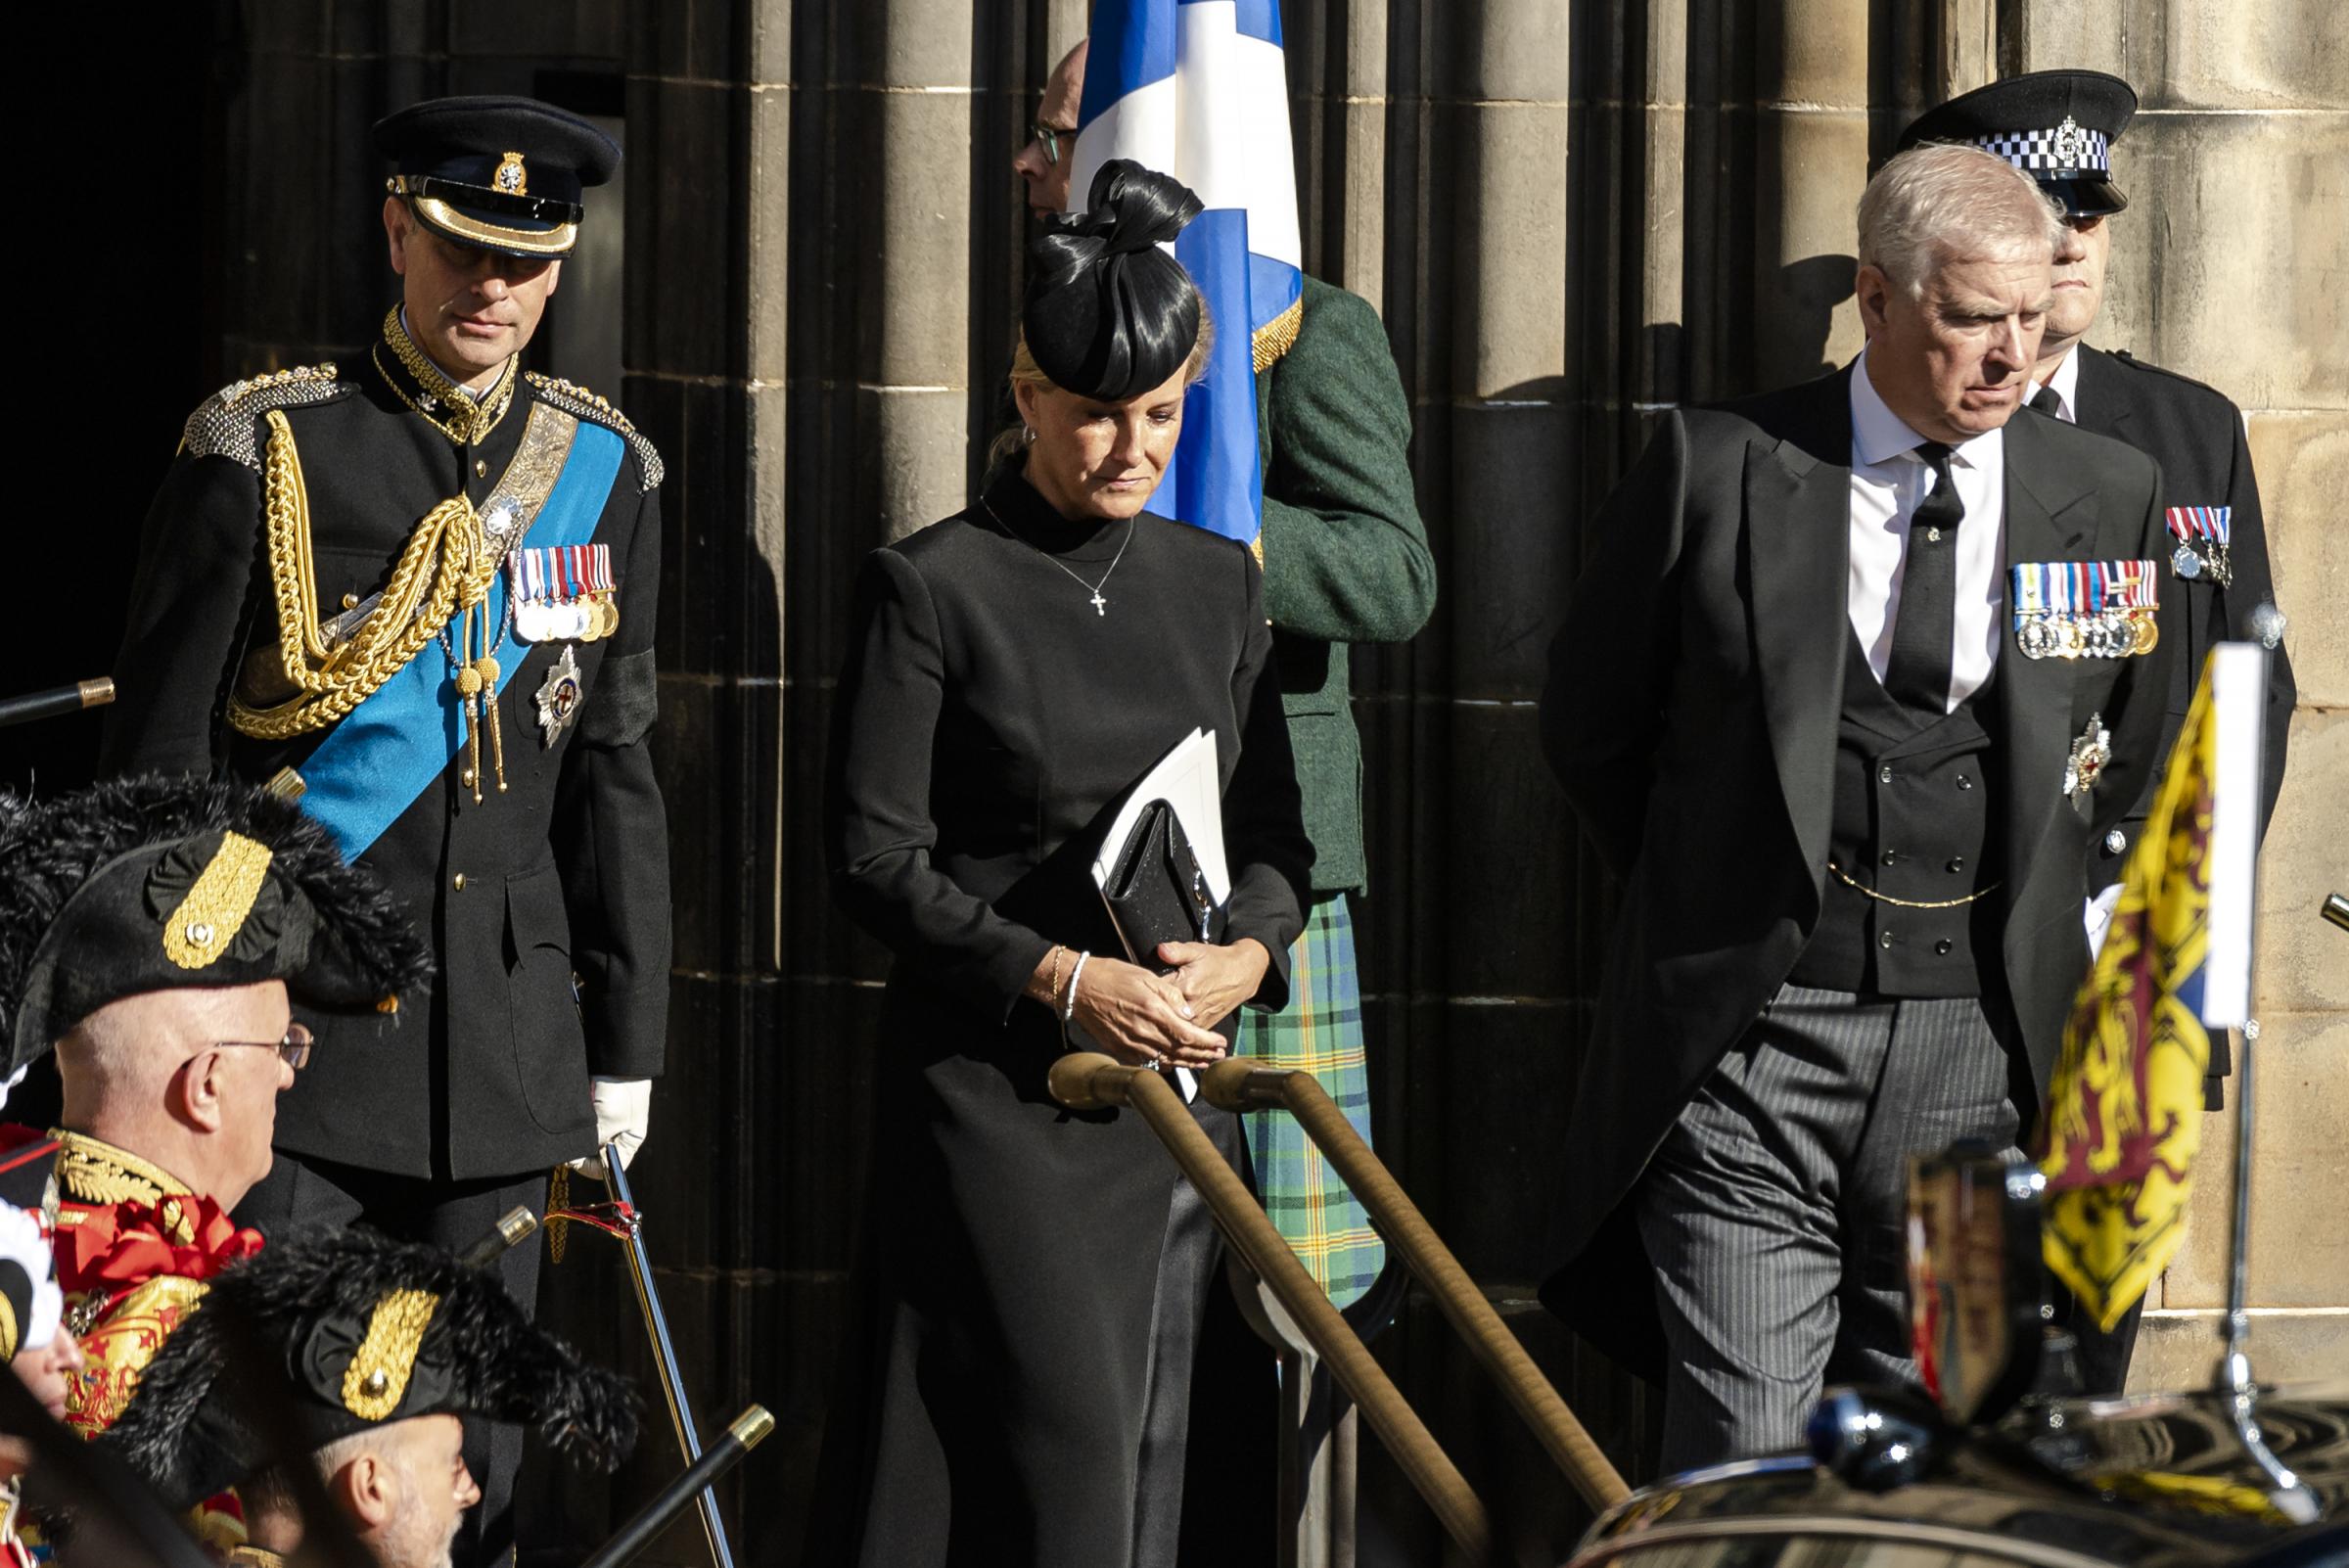 The Earl of Wessex, the Countess of Wessex and the Duke of York leave St Giles Cathedral after a Service of Prayer and Reflection for Queen Elizabeths life. Picture credit: Euan Cherry/Daily Mail/PA Wire.